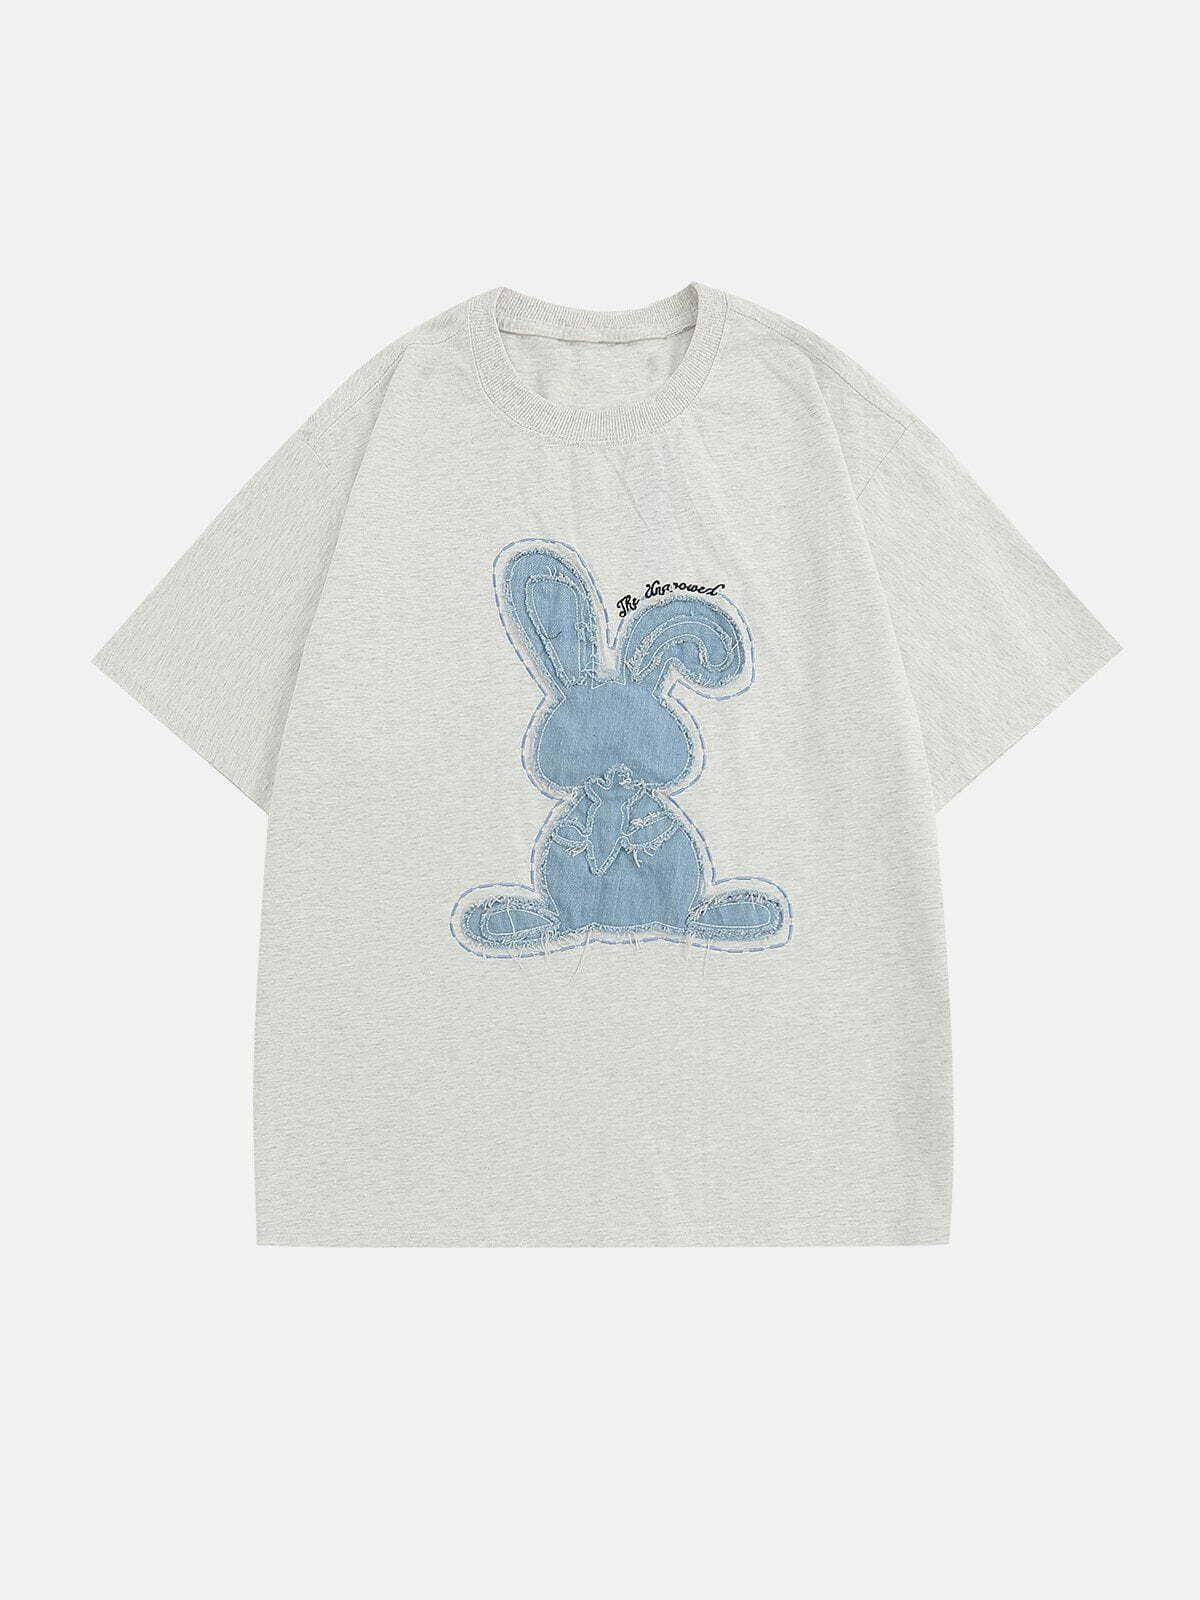 denim rabbit tee applique embroidery [youthful] 6770